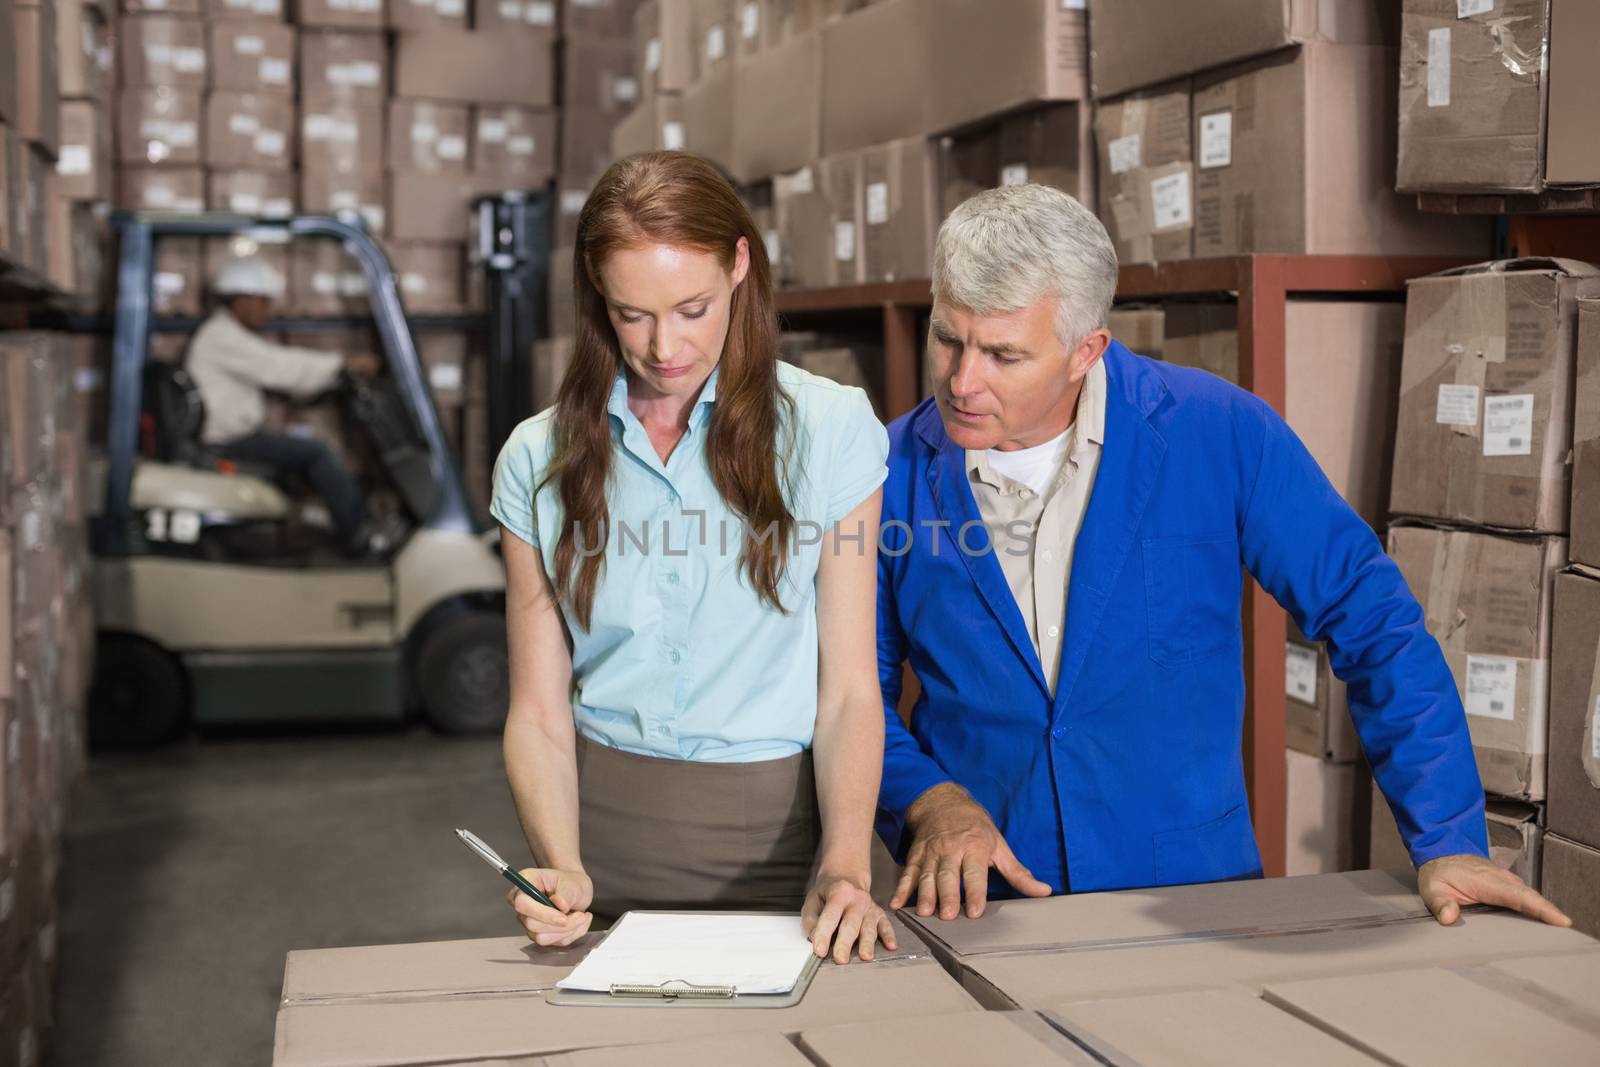 Warehouse manager and foreman working together in a large warehouse